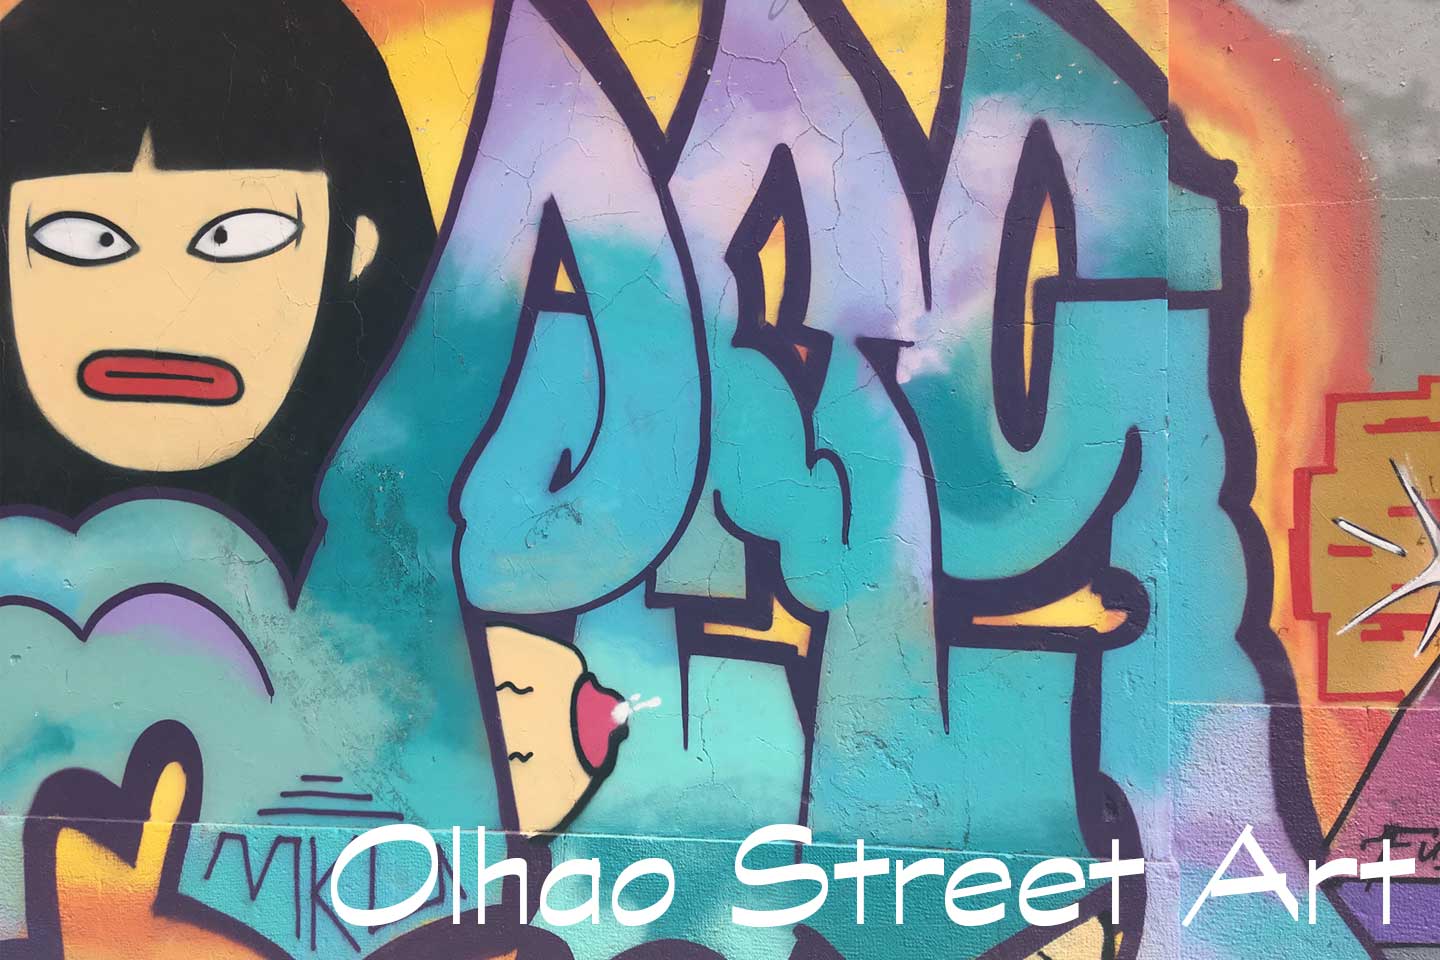 A Photo of Olhao Street Art - A cartoon face of a girl and a greeny blue tag